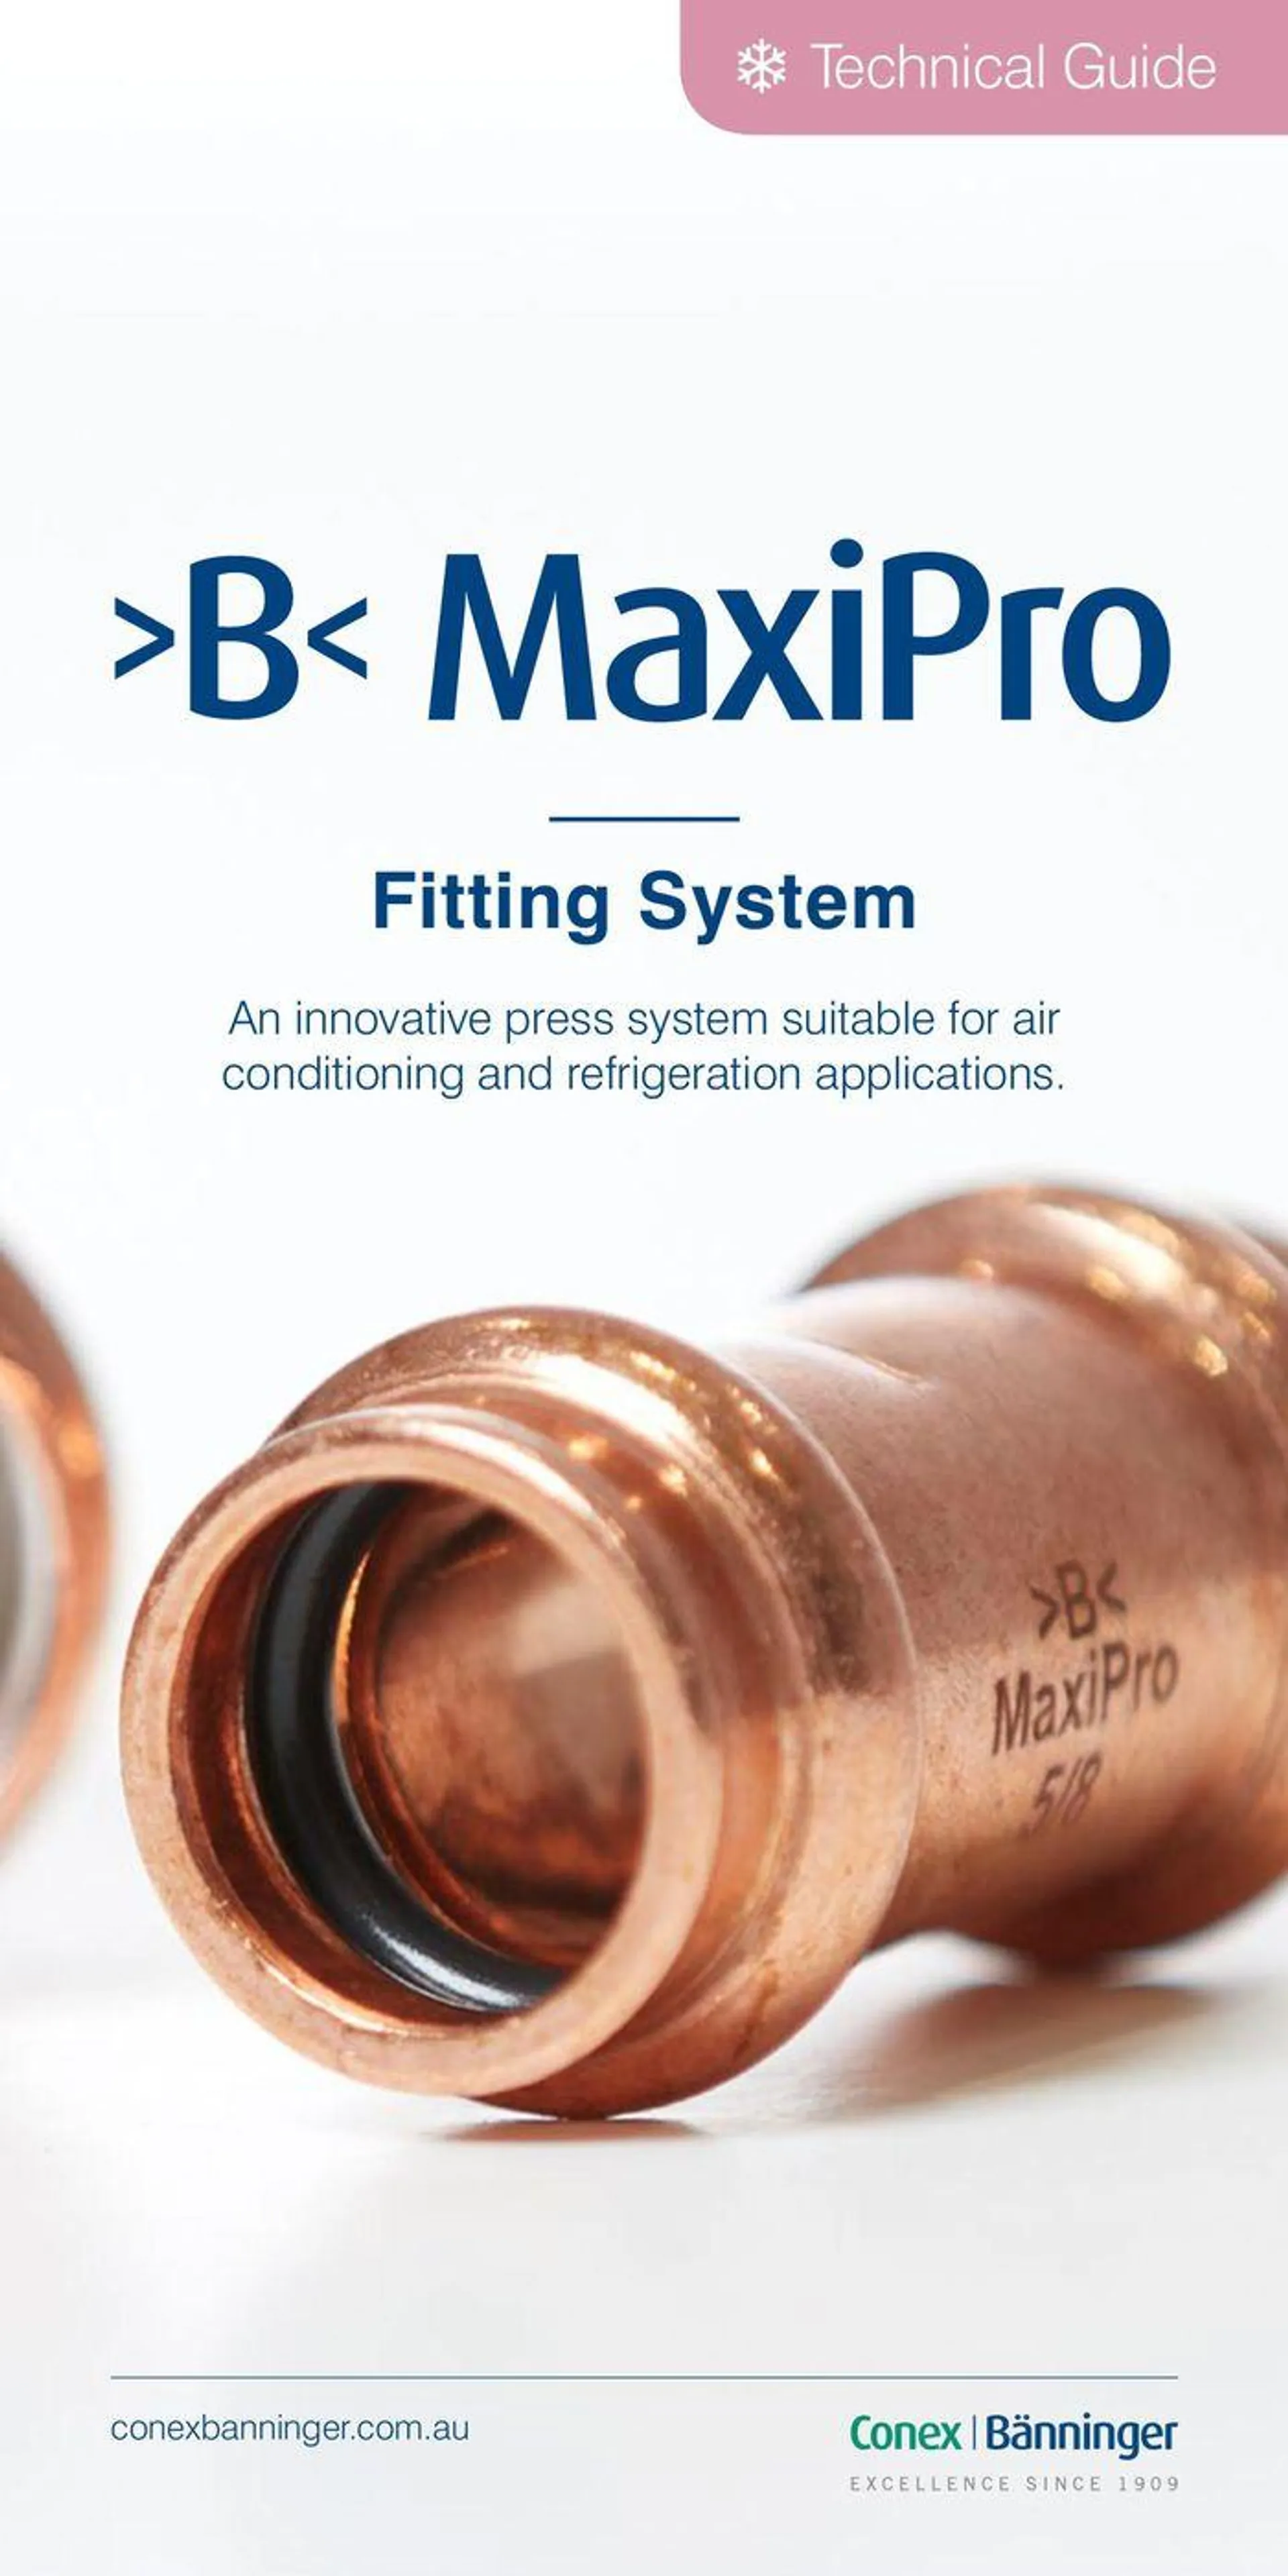 >B< MaxiPro Fitting System - 1